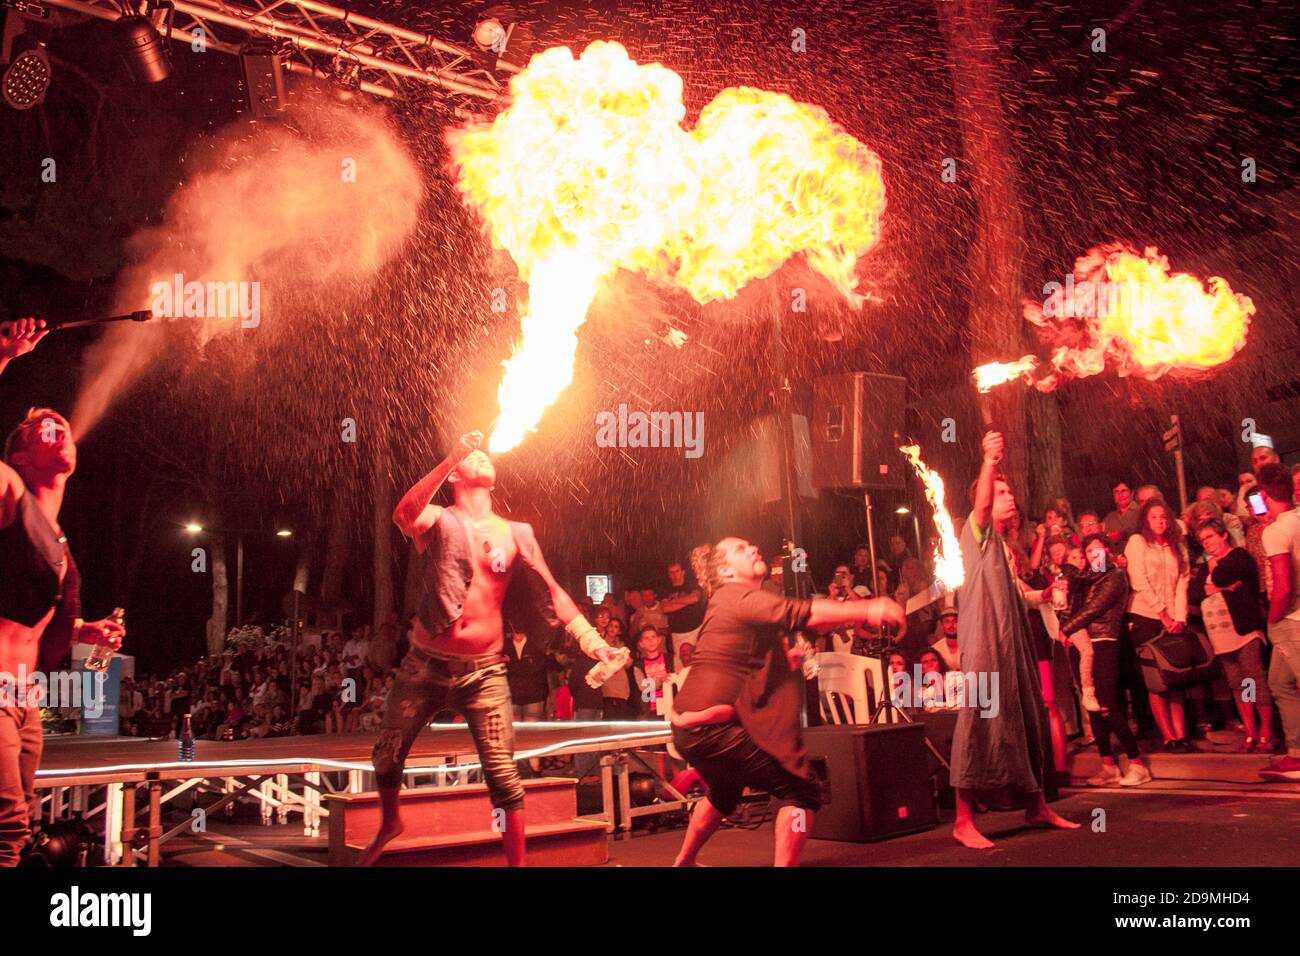 LOREO, ITALY 24 MARCH 2020: Fire eaters They perform a show to the public Stock Photo